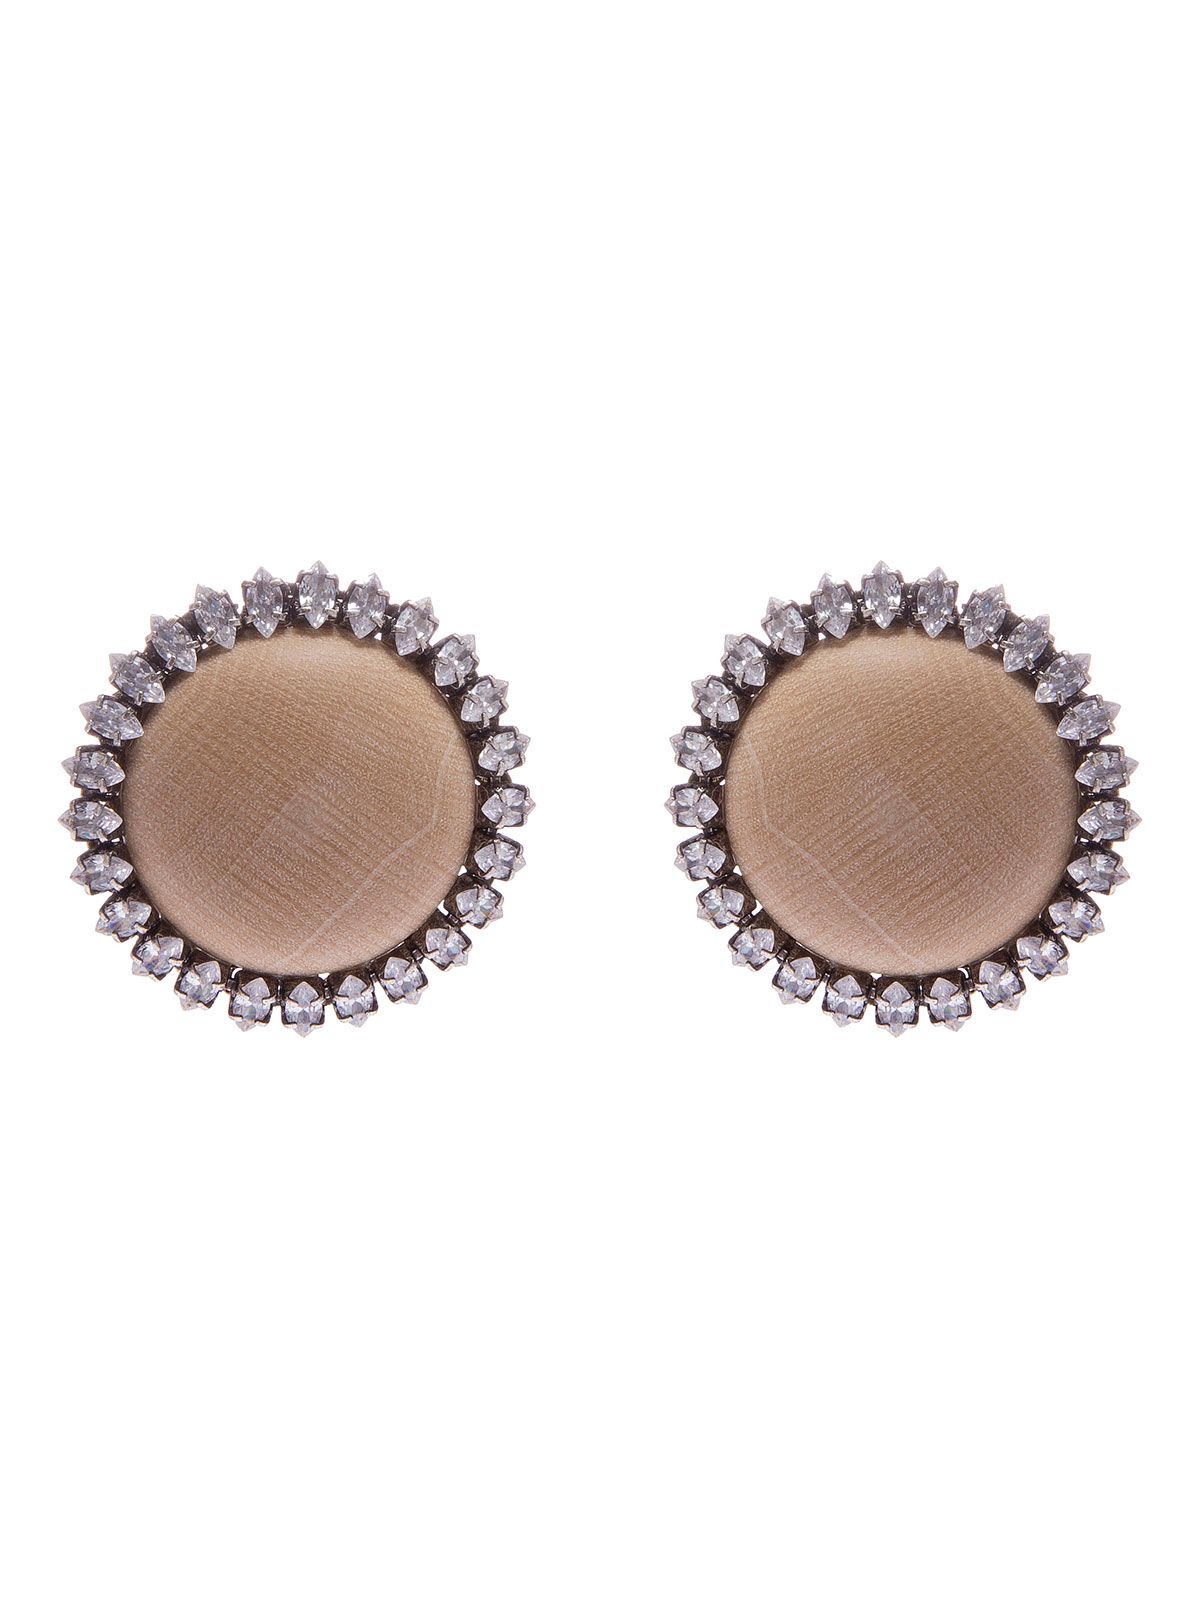 Wood cabochon earrings with crystals